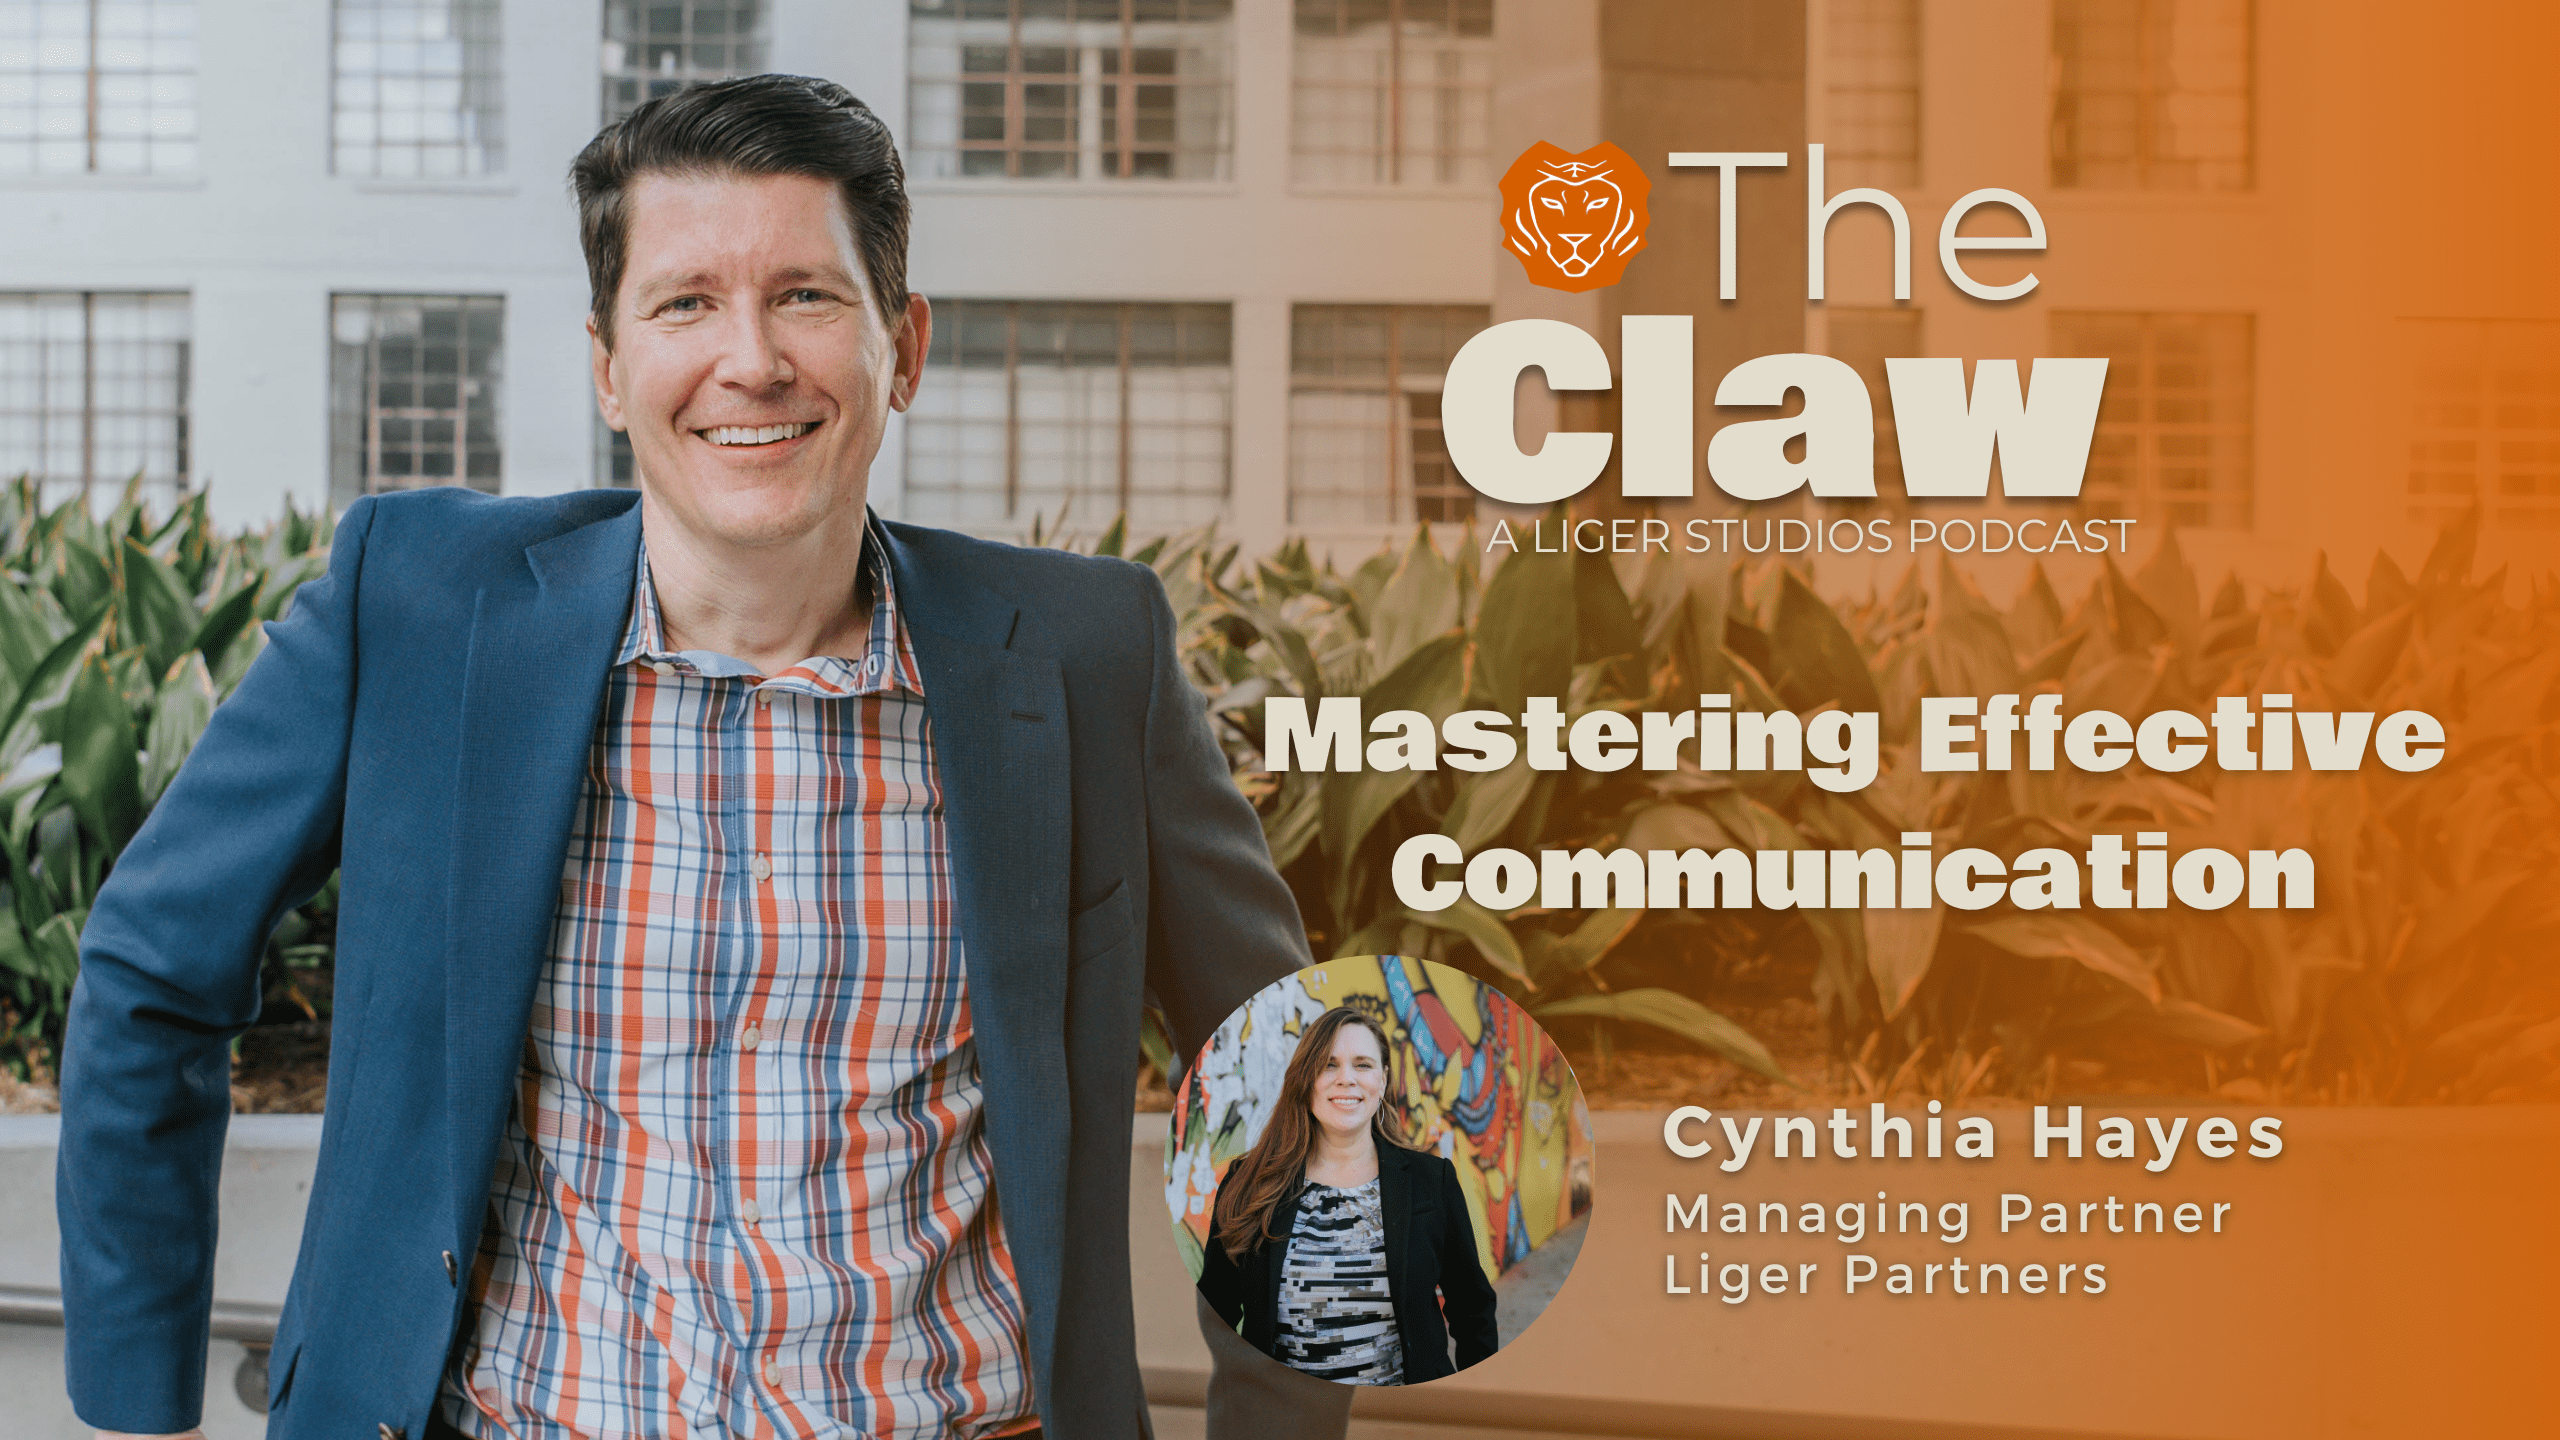 The Claw Podcast: Mastering Effective Communication with Cynthia Hayes